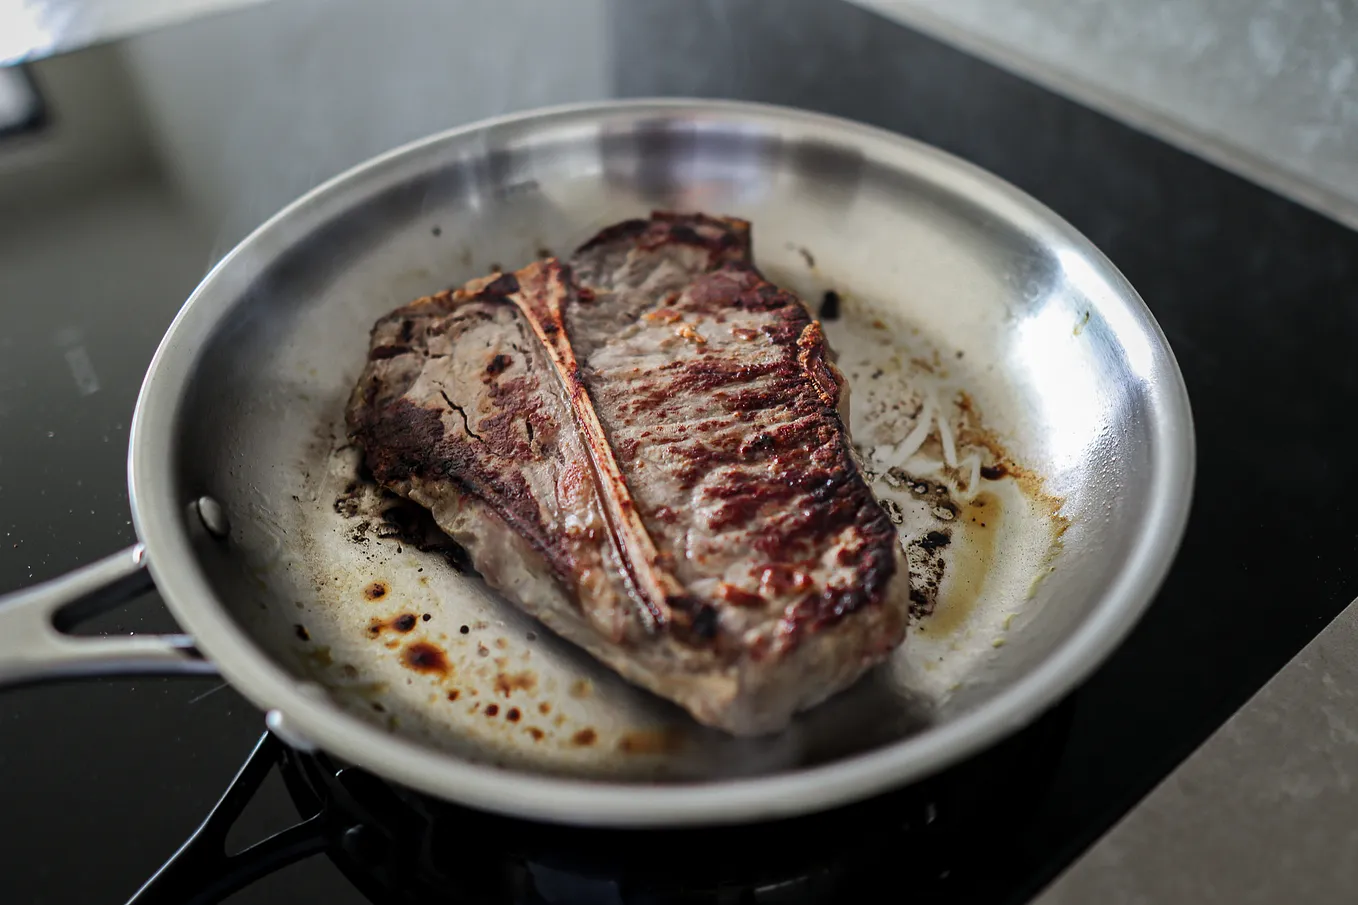 How Do I Make a Good Steak in Only a Pan?